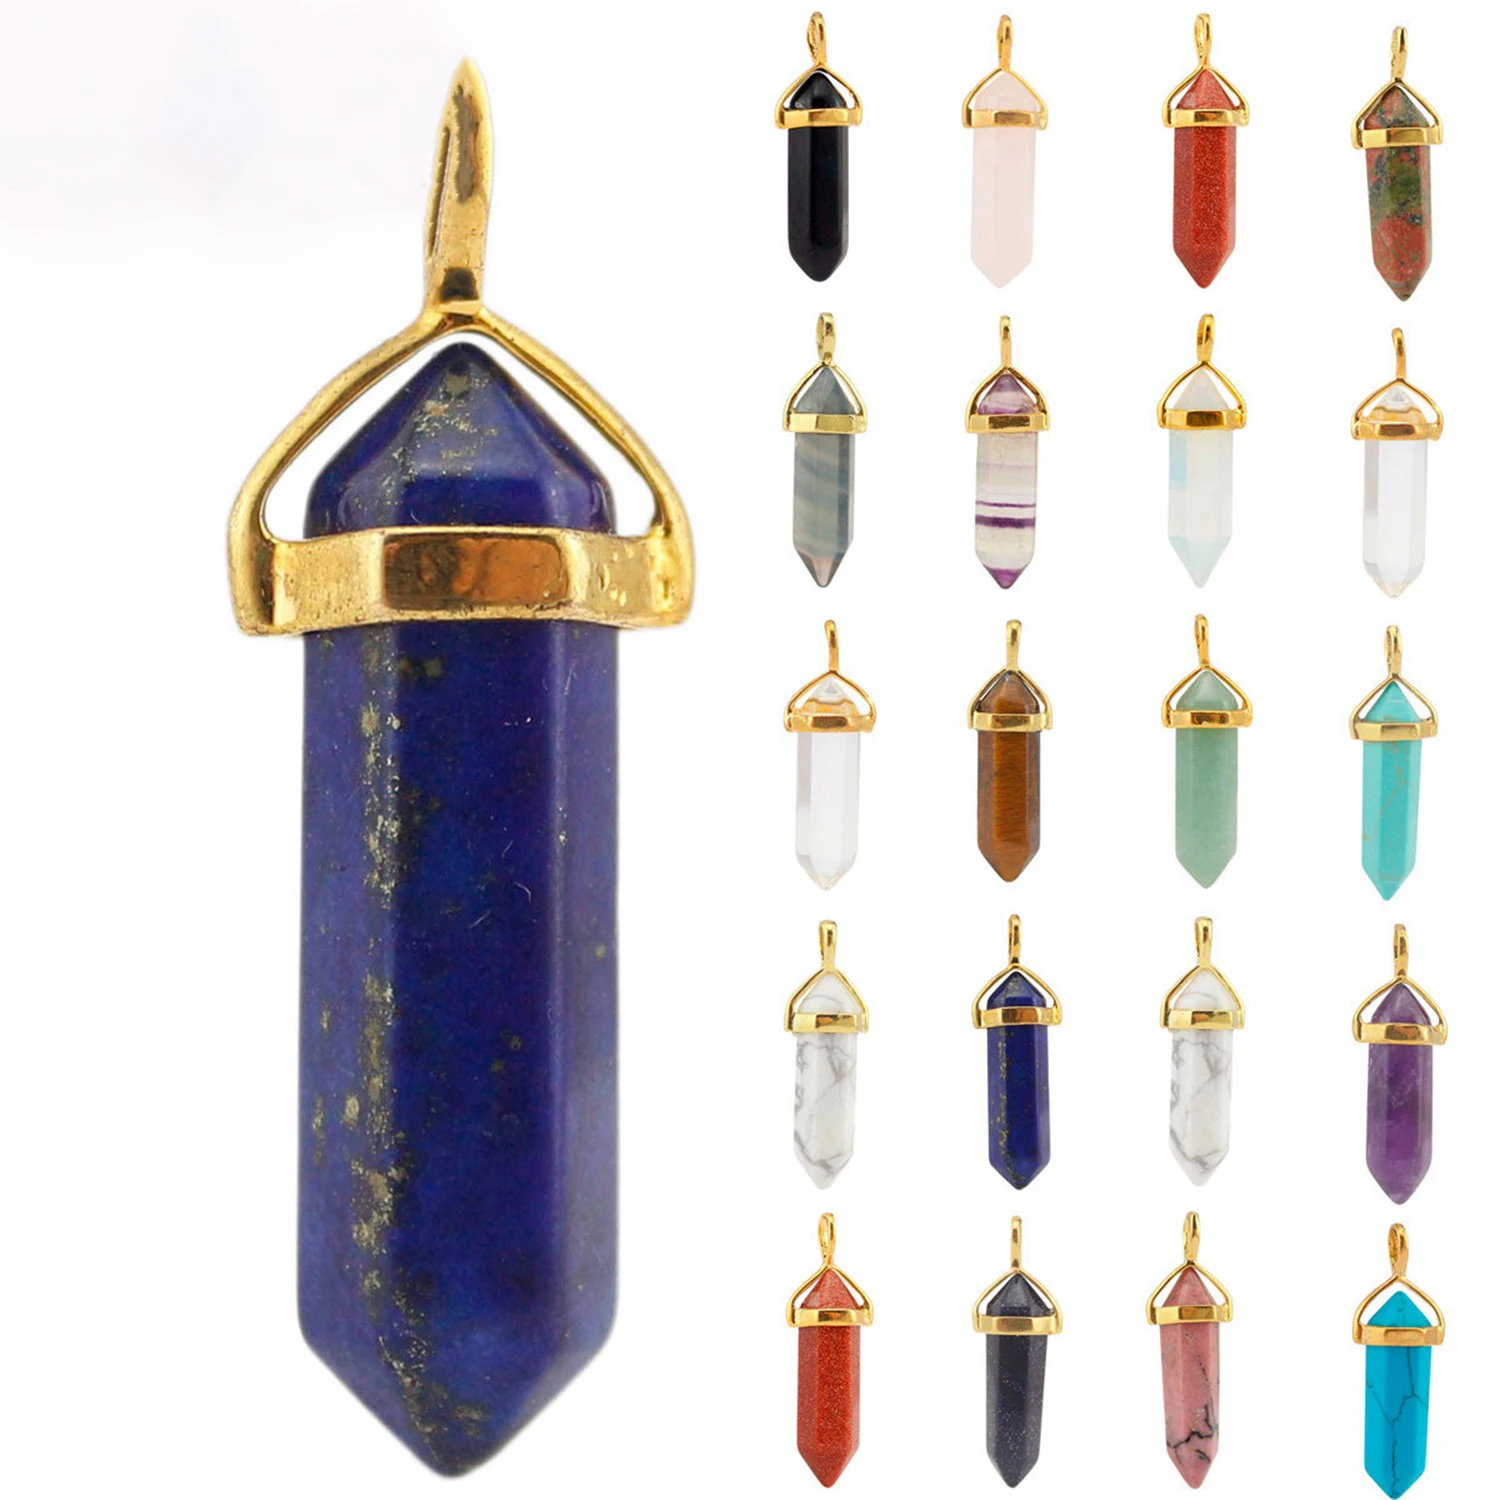 

Natural Gem Stone Hexagonal Prism Pendant Healing Crystal Point Necklace Reiki Chakra Column Pendulum Charms for Jewelry Making